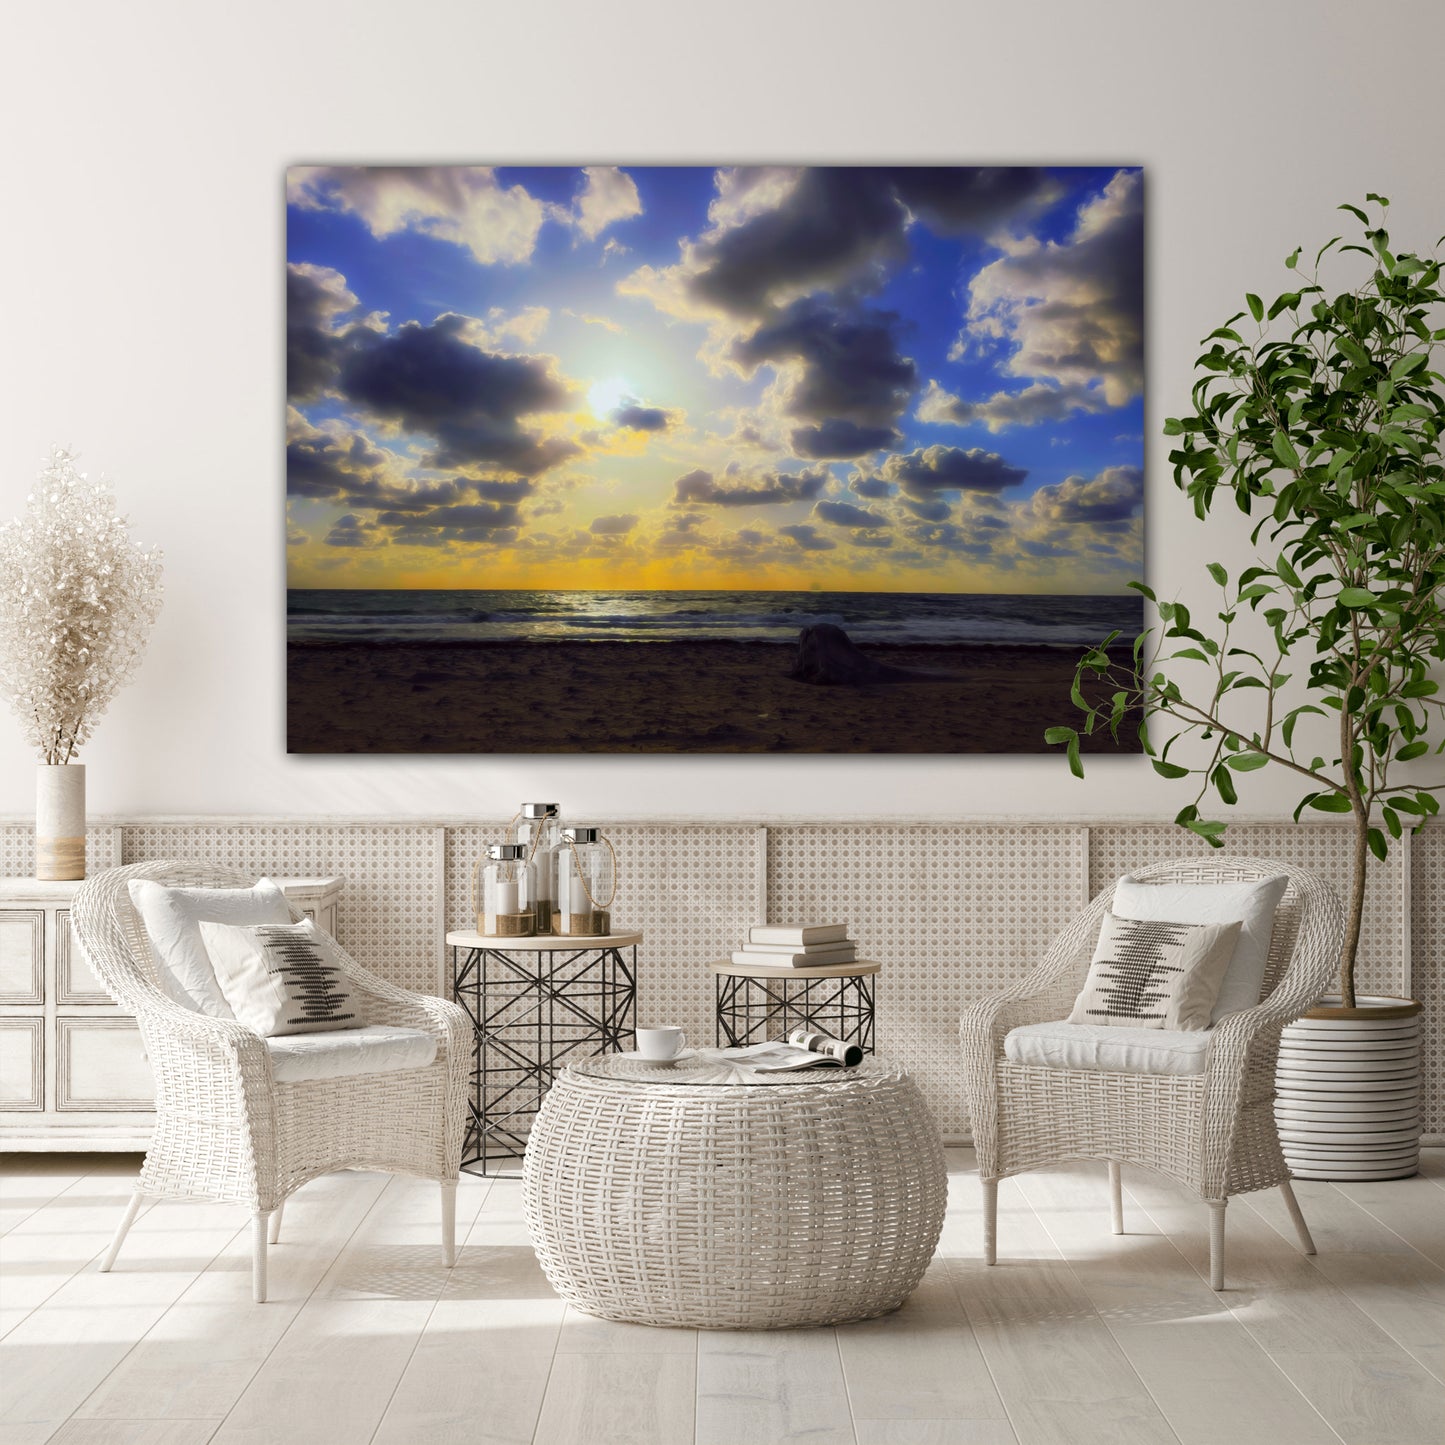 Painted Morning Bliss  - Classic Acrylic Print